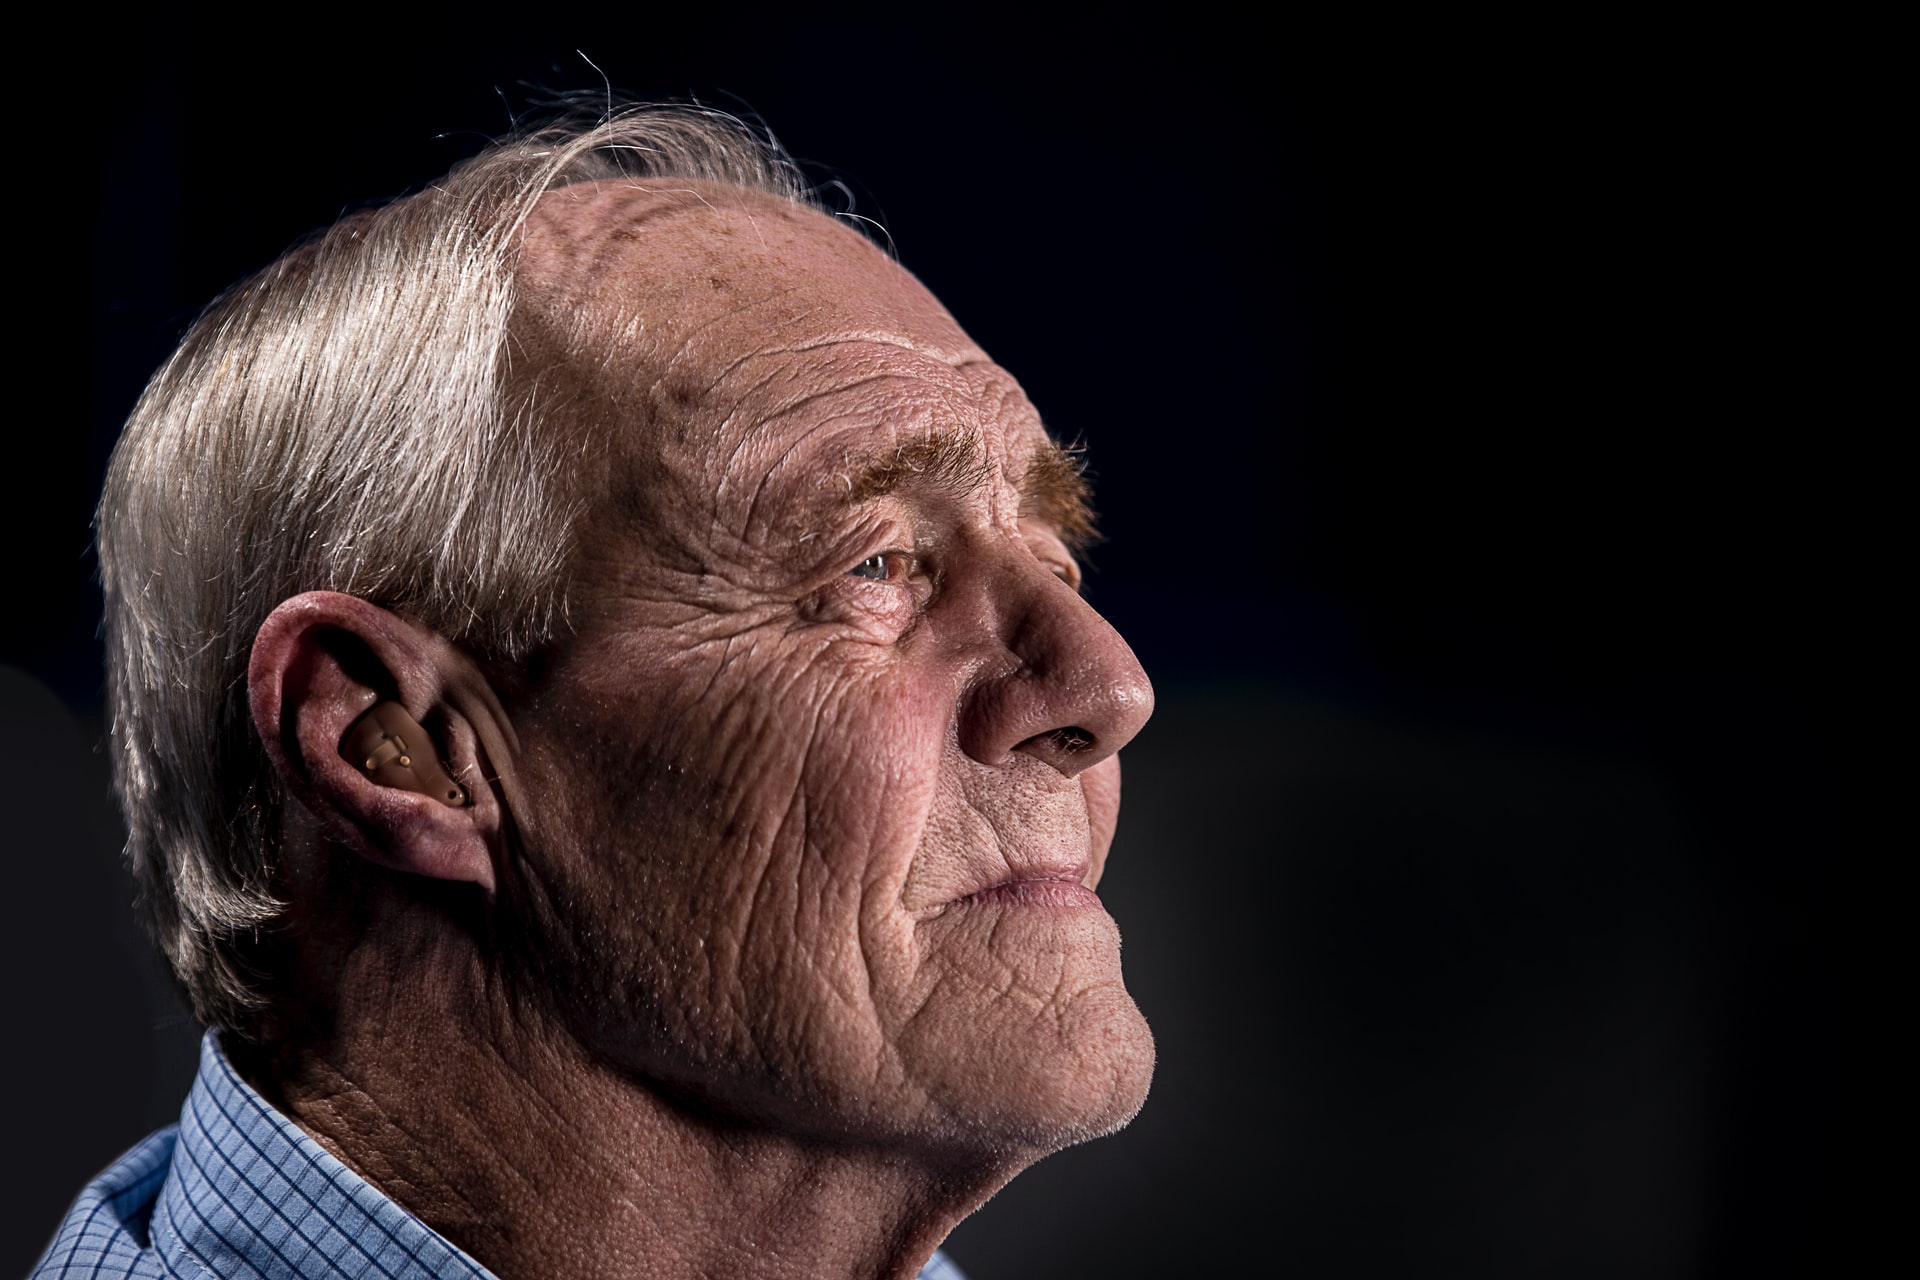 Older man wearing a hearing aid and looking into the distance.